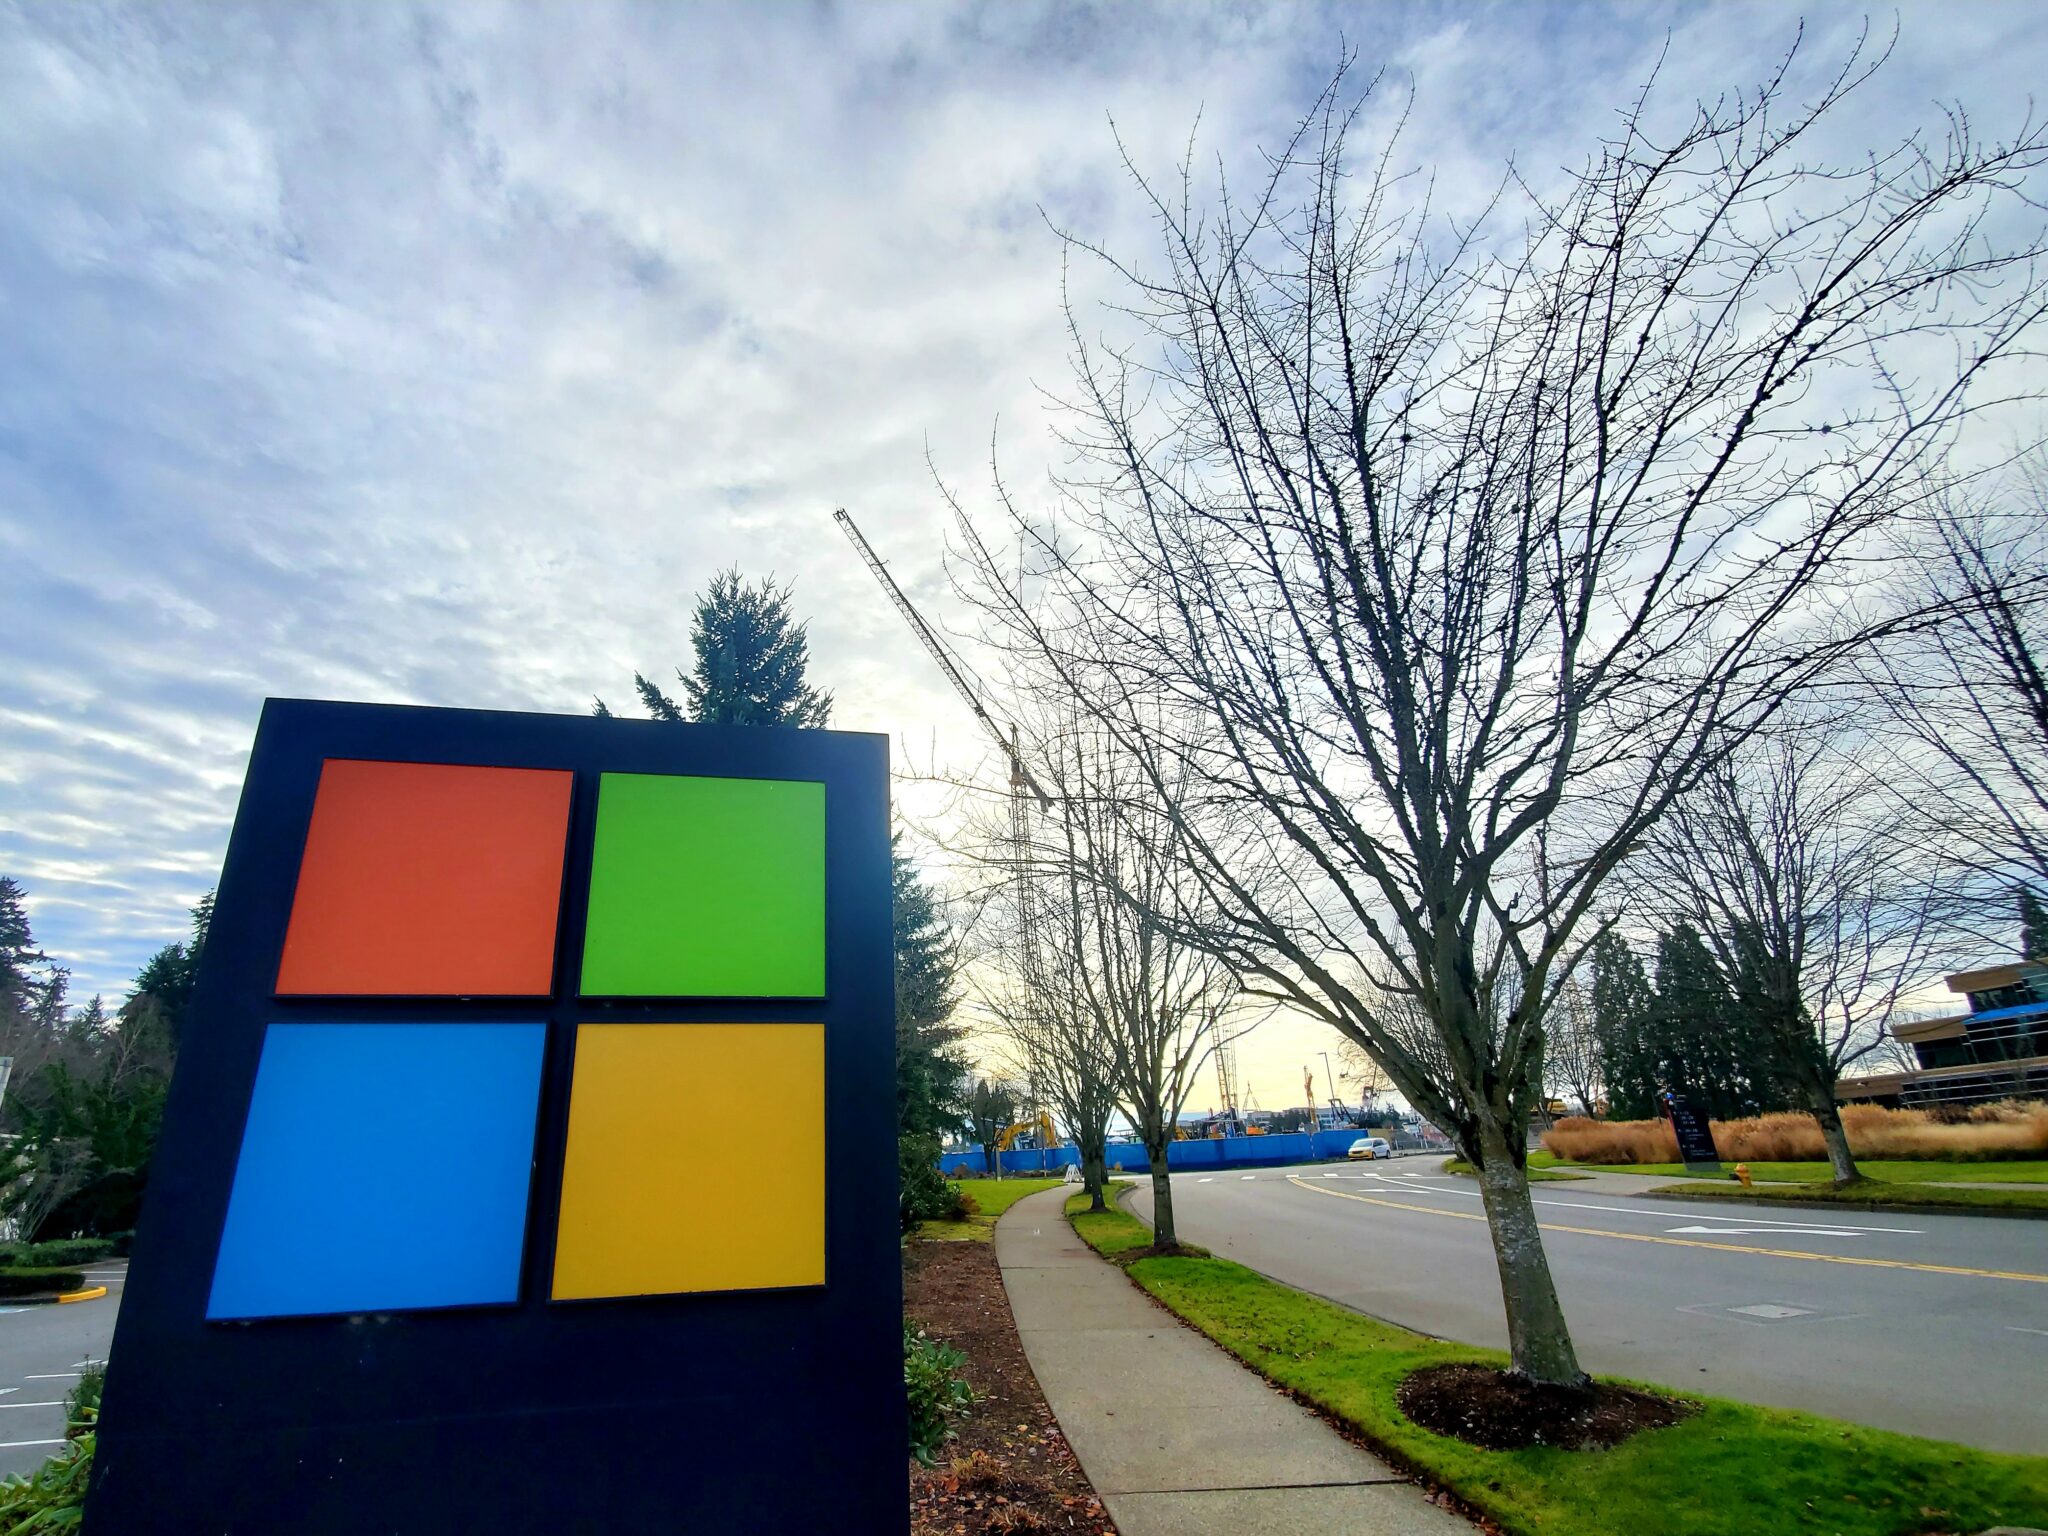 Microsoft cut carbon emissions 6% last year, predicts climate investments will pay off in long run